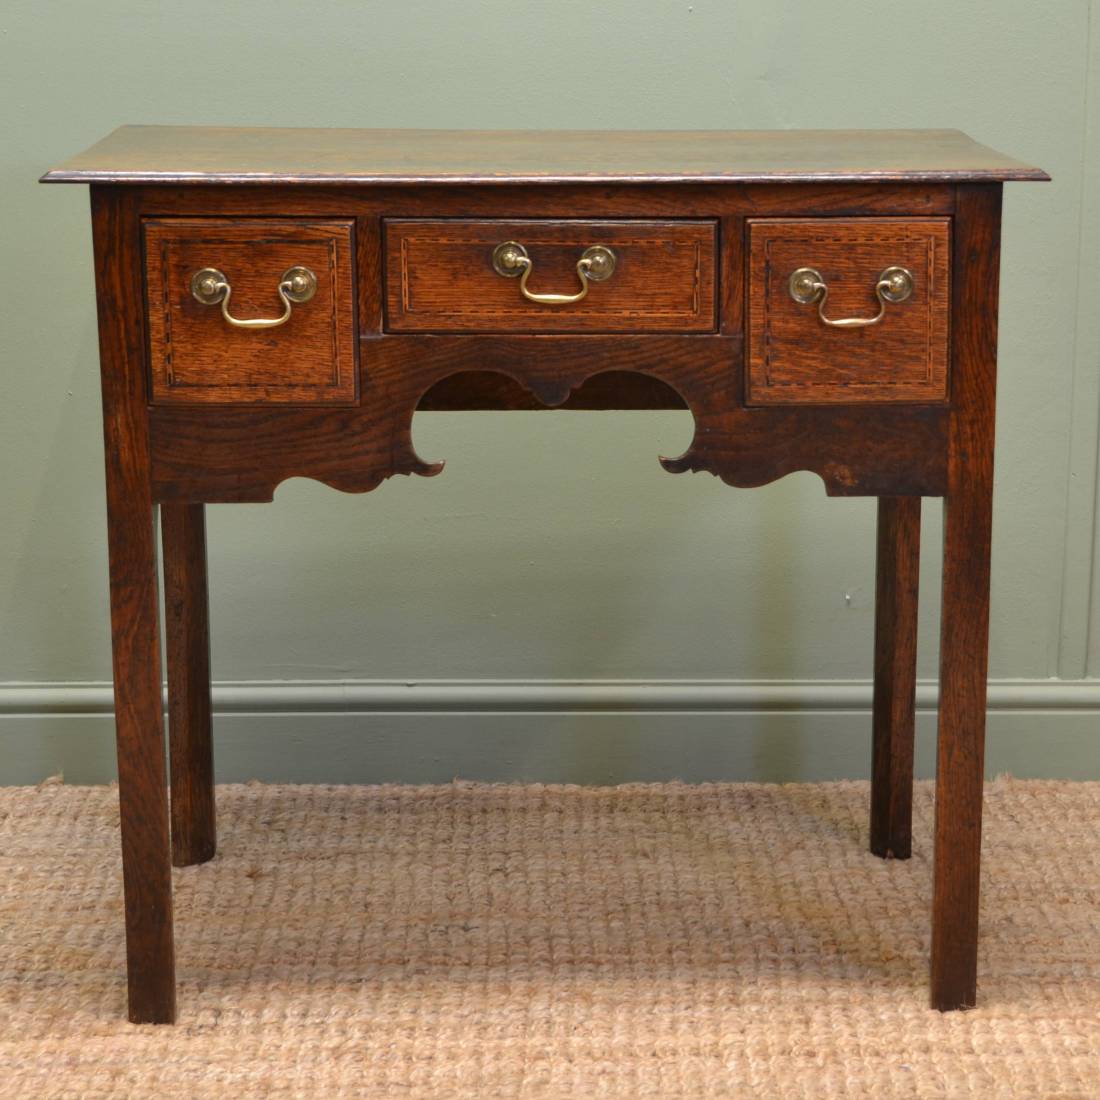 Early 19th Century Antique Low Boy with Inlay Banding